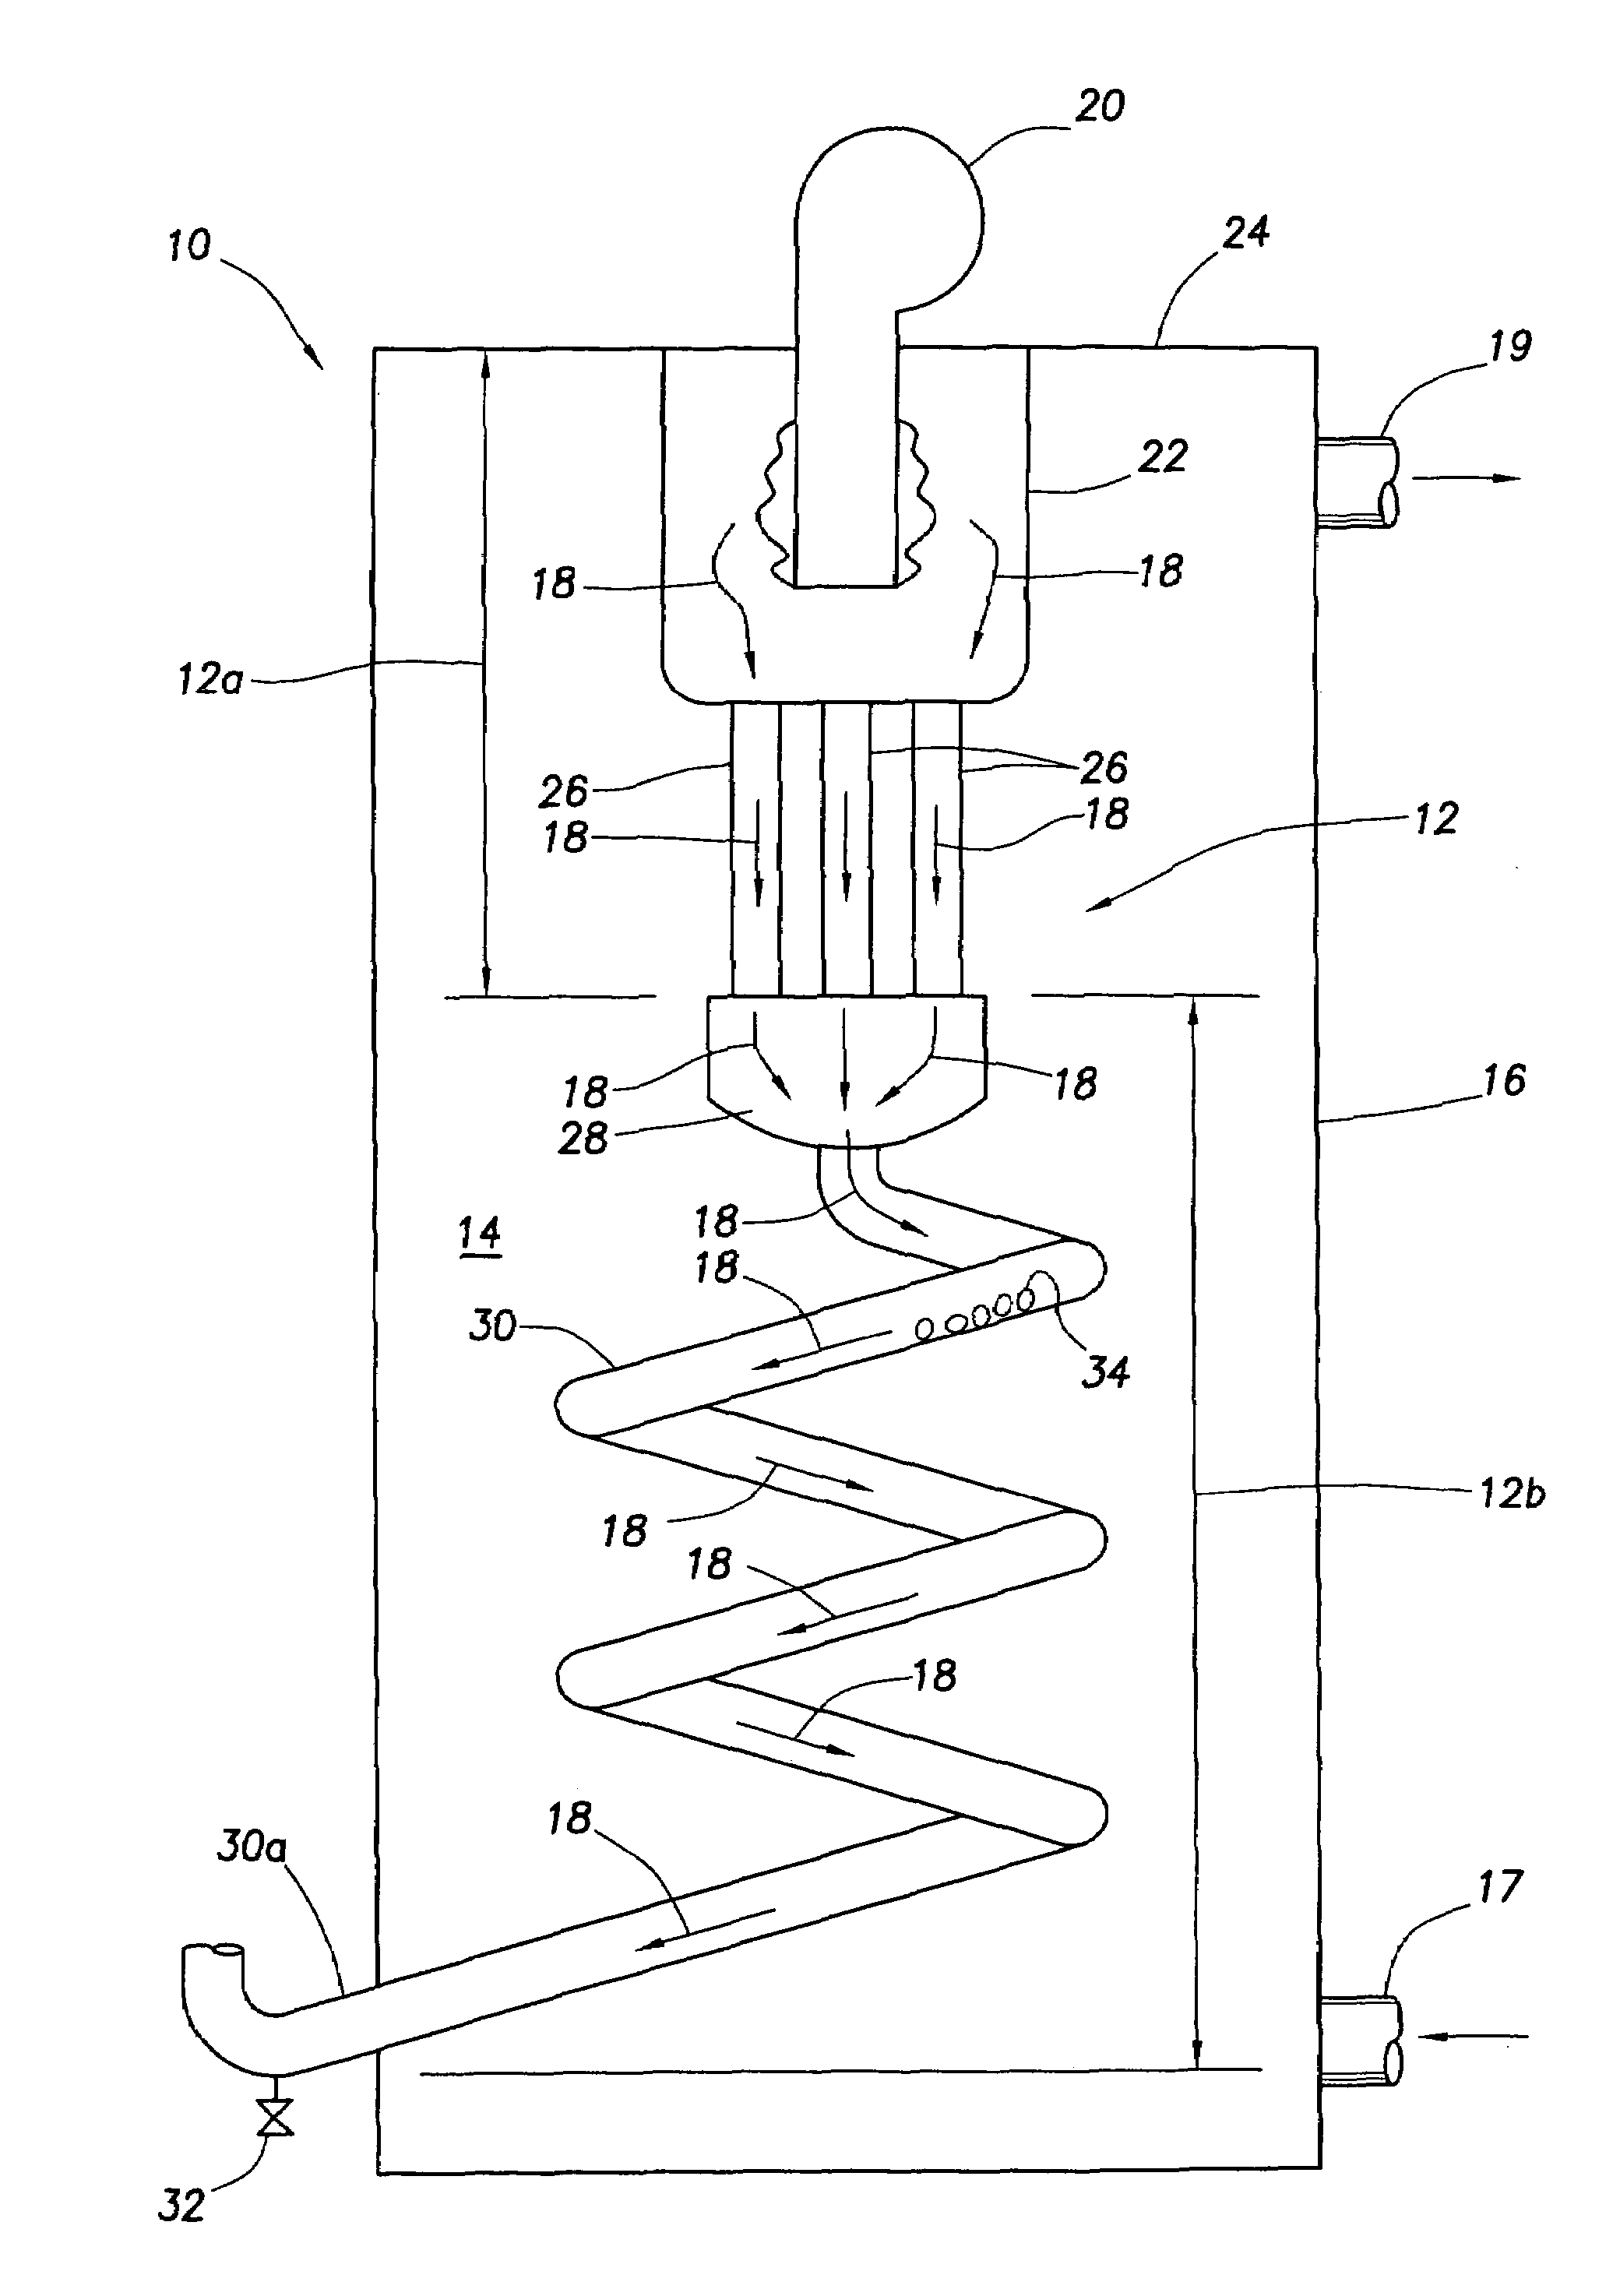 Single pass fuel-fired fluid heating/storage device